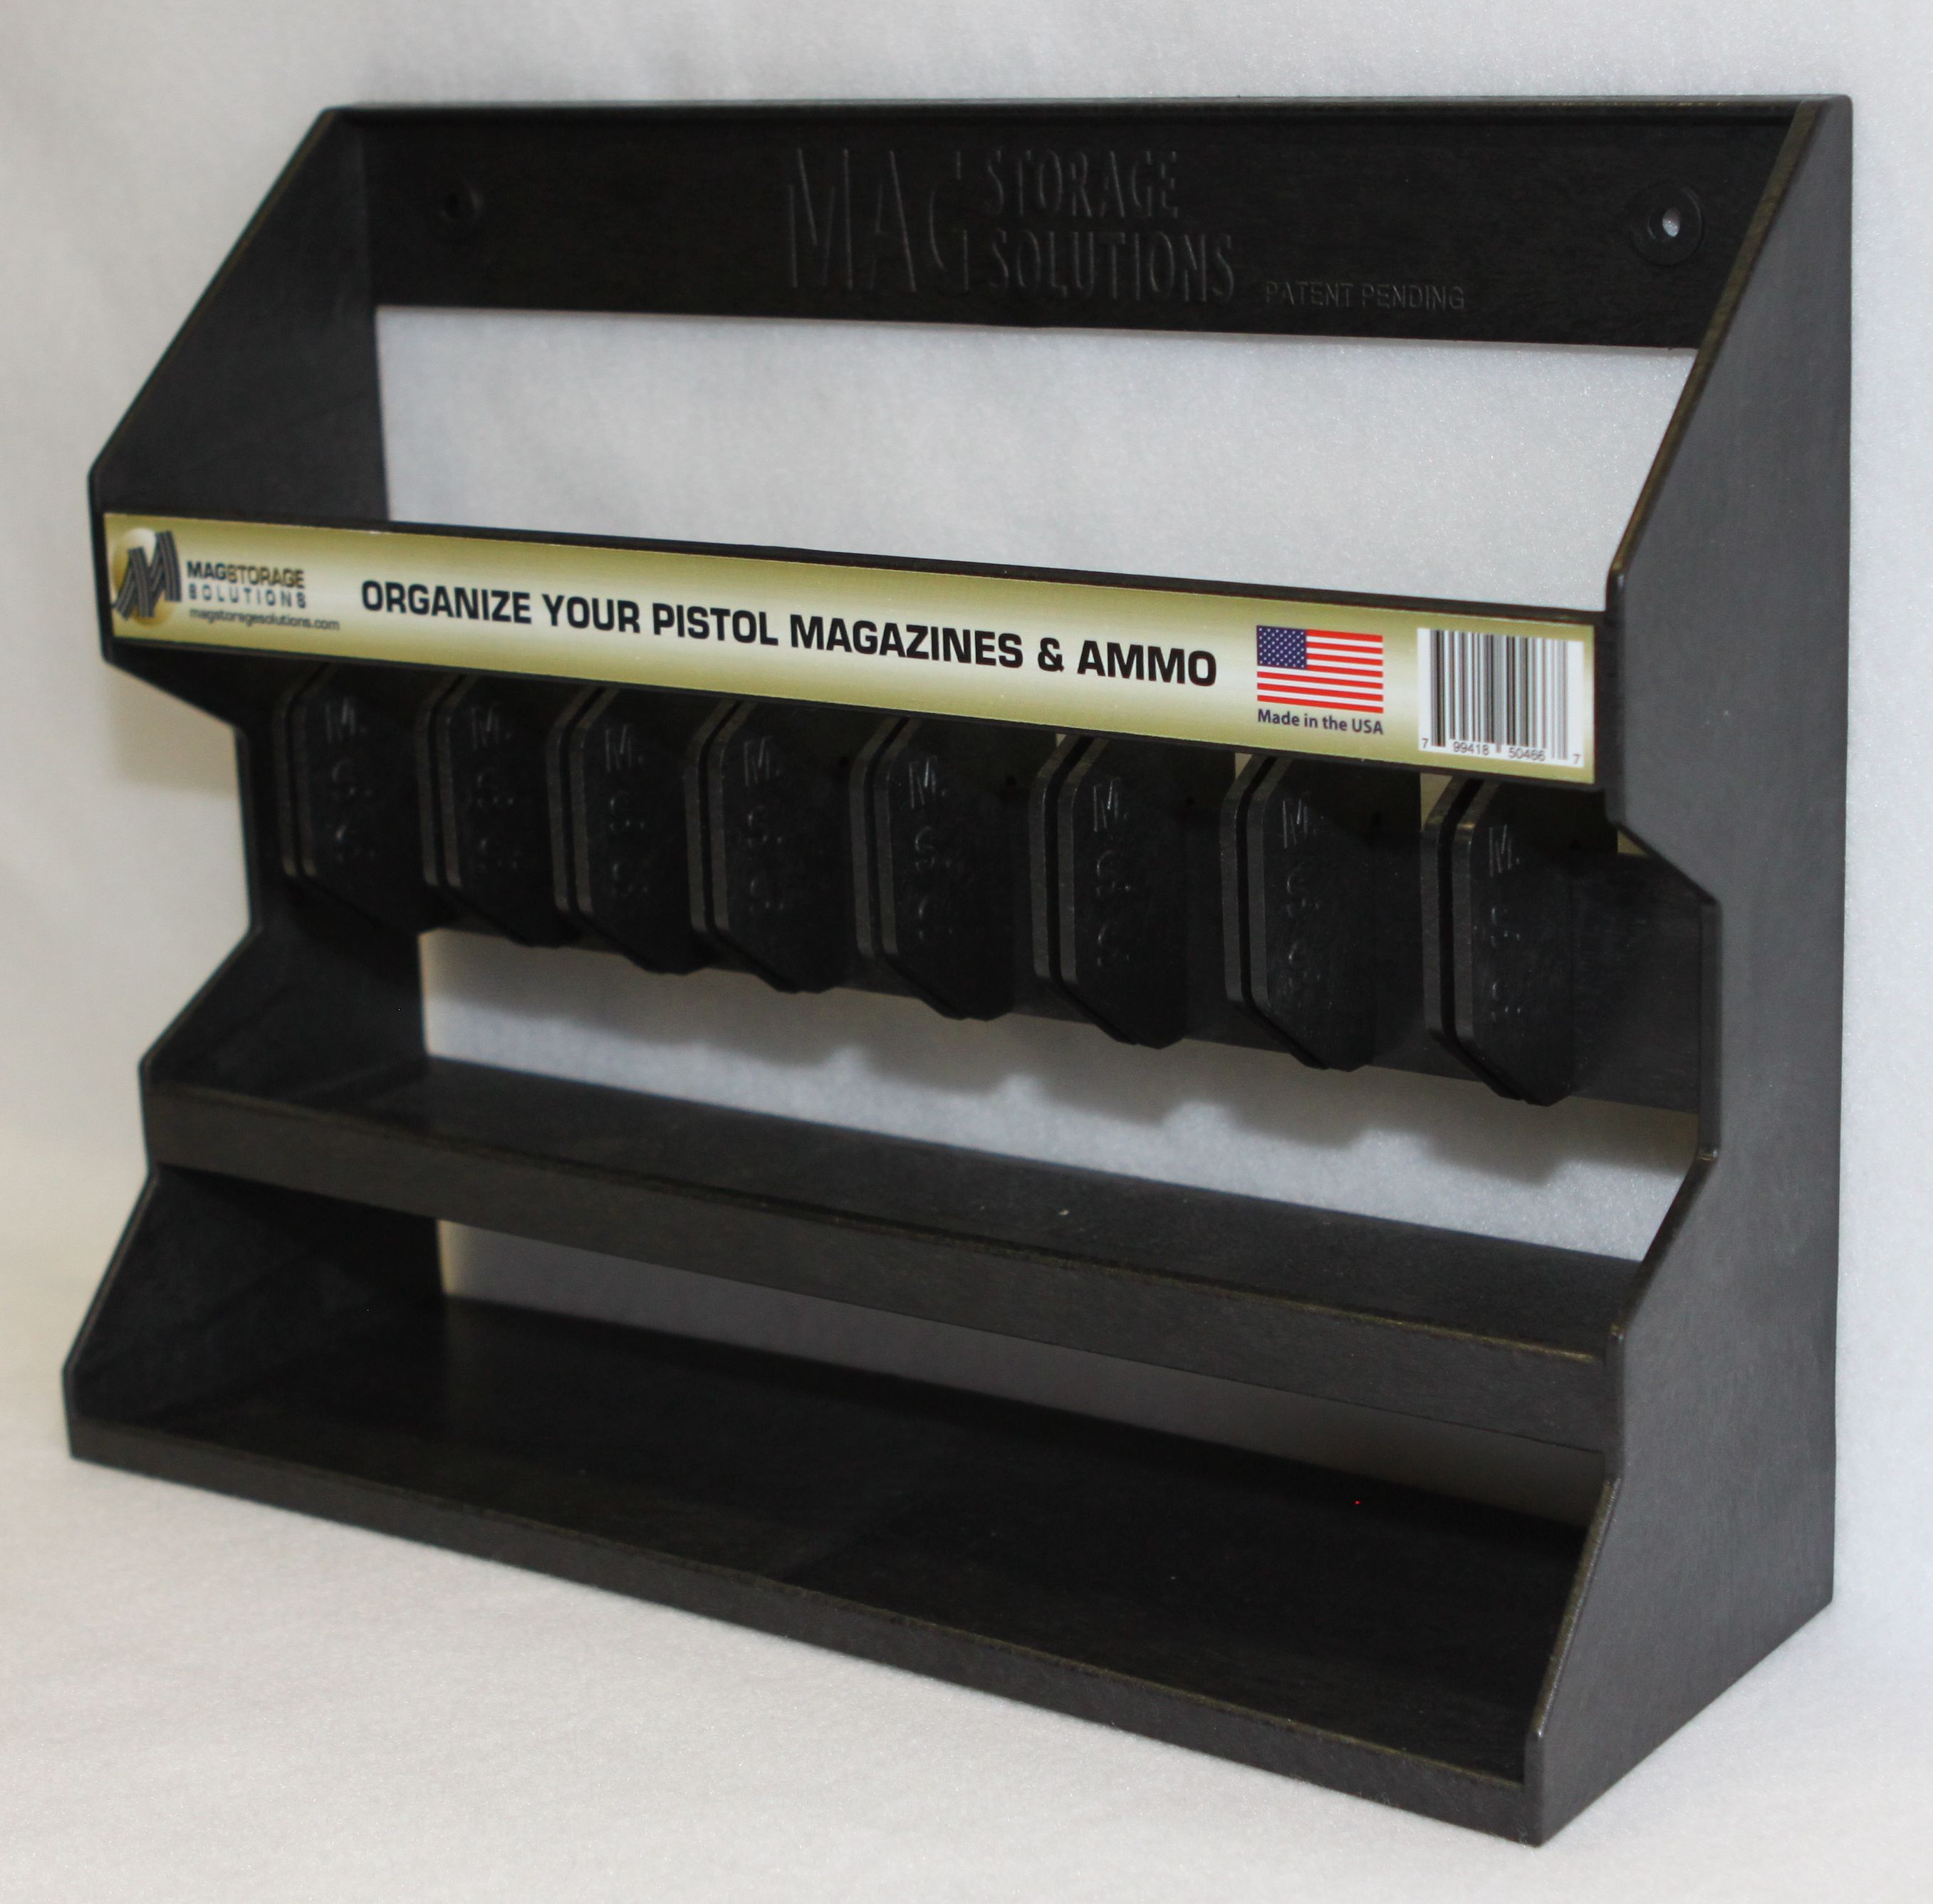 Magstorage Solutions Adjustable Pistol Magazine and Ammo Holder 4 Star Rating 21 off for sale online 